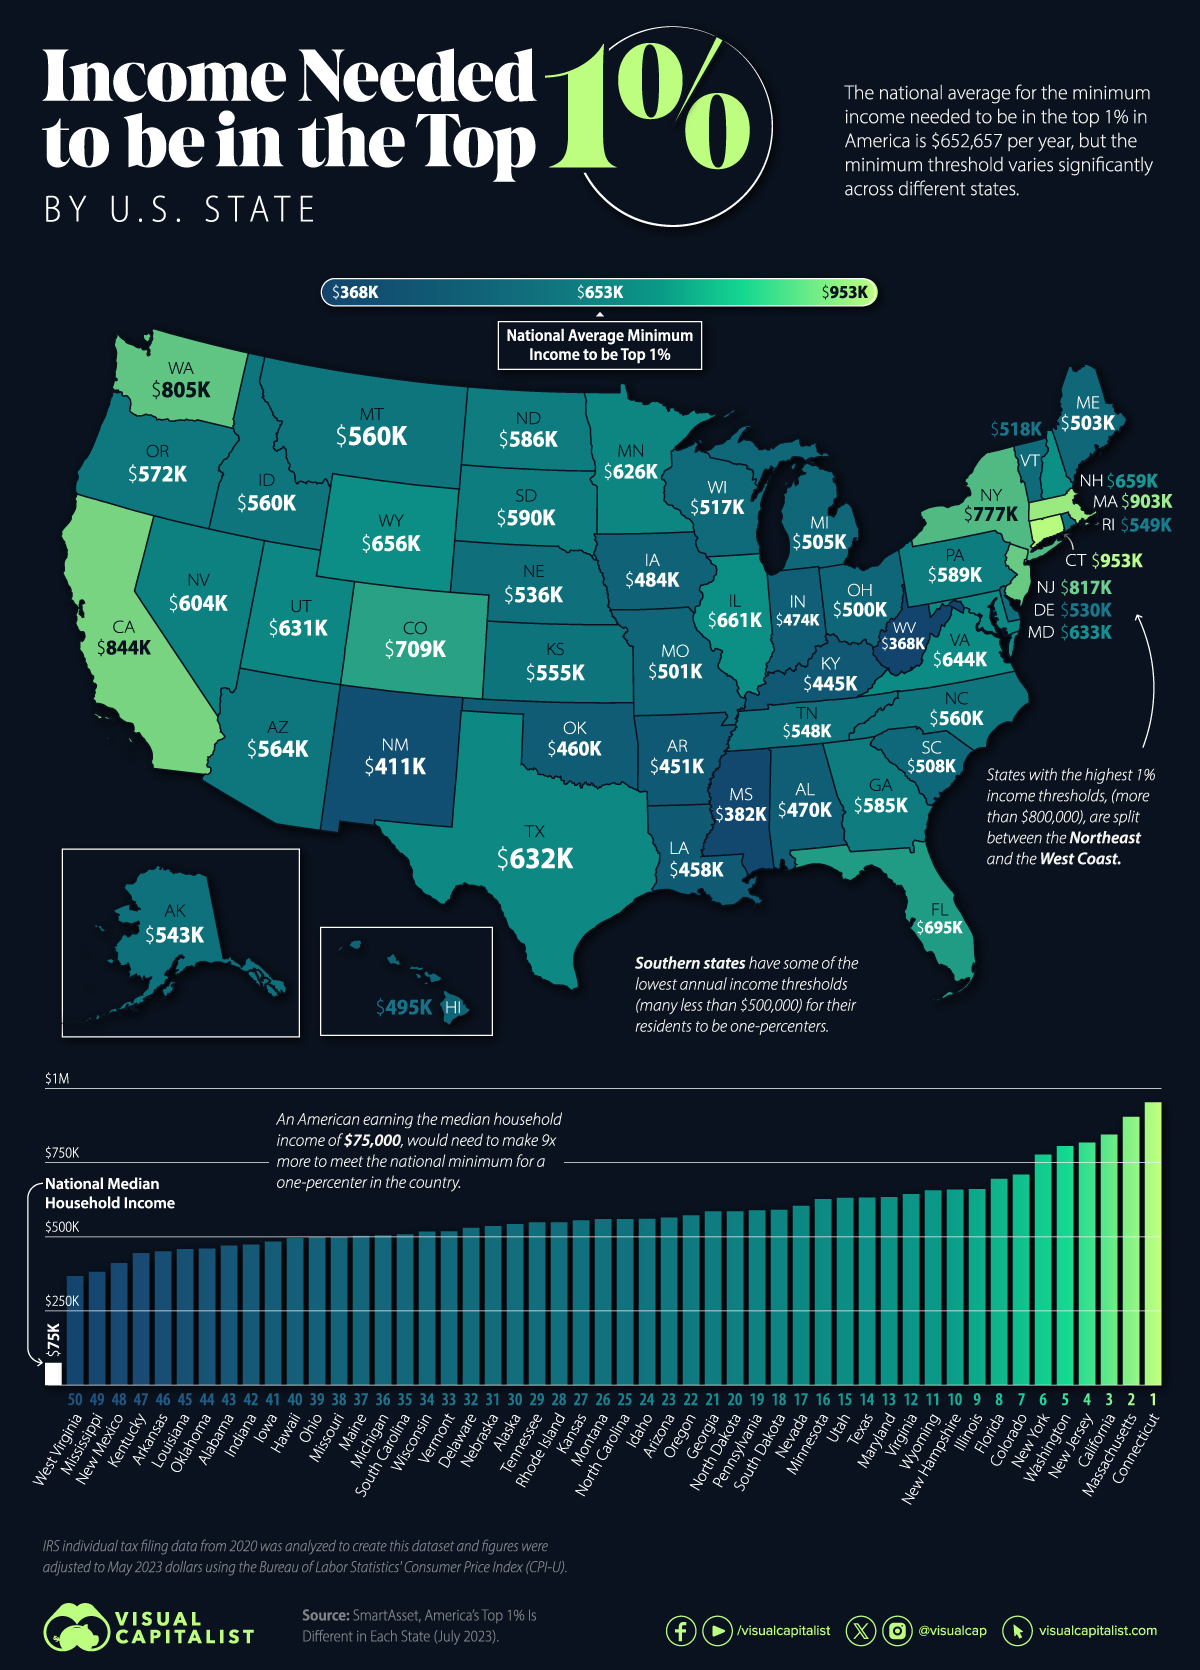 How Much Does it Take to be the Top 1% in Each U.S. State?